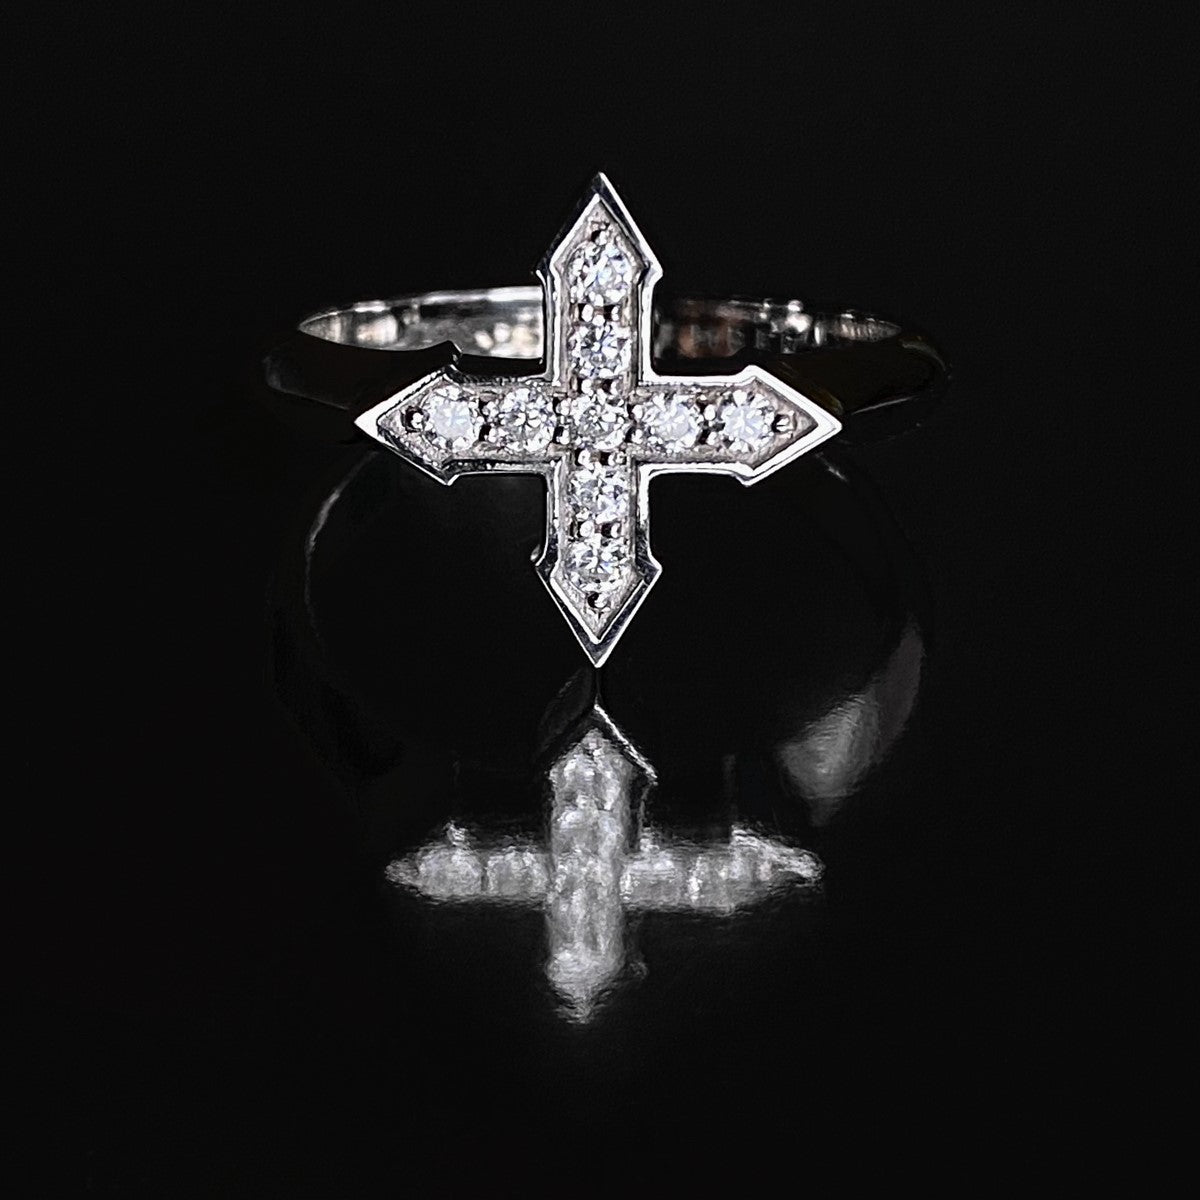 RING STAR "GLOW" WITH MOISSANITE / SILVER